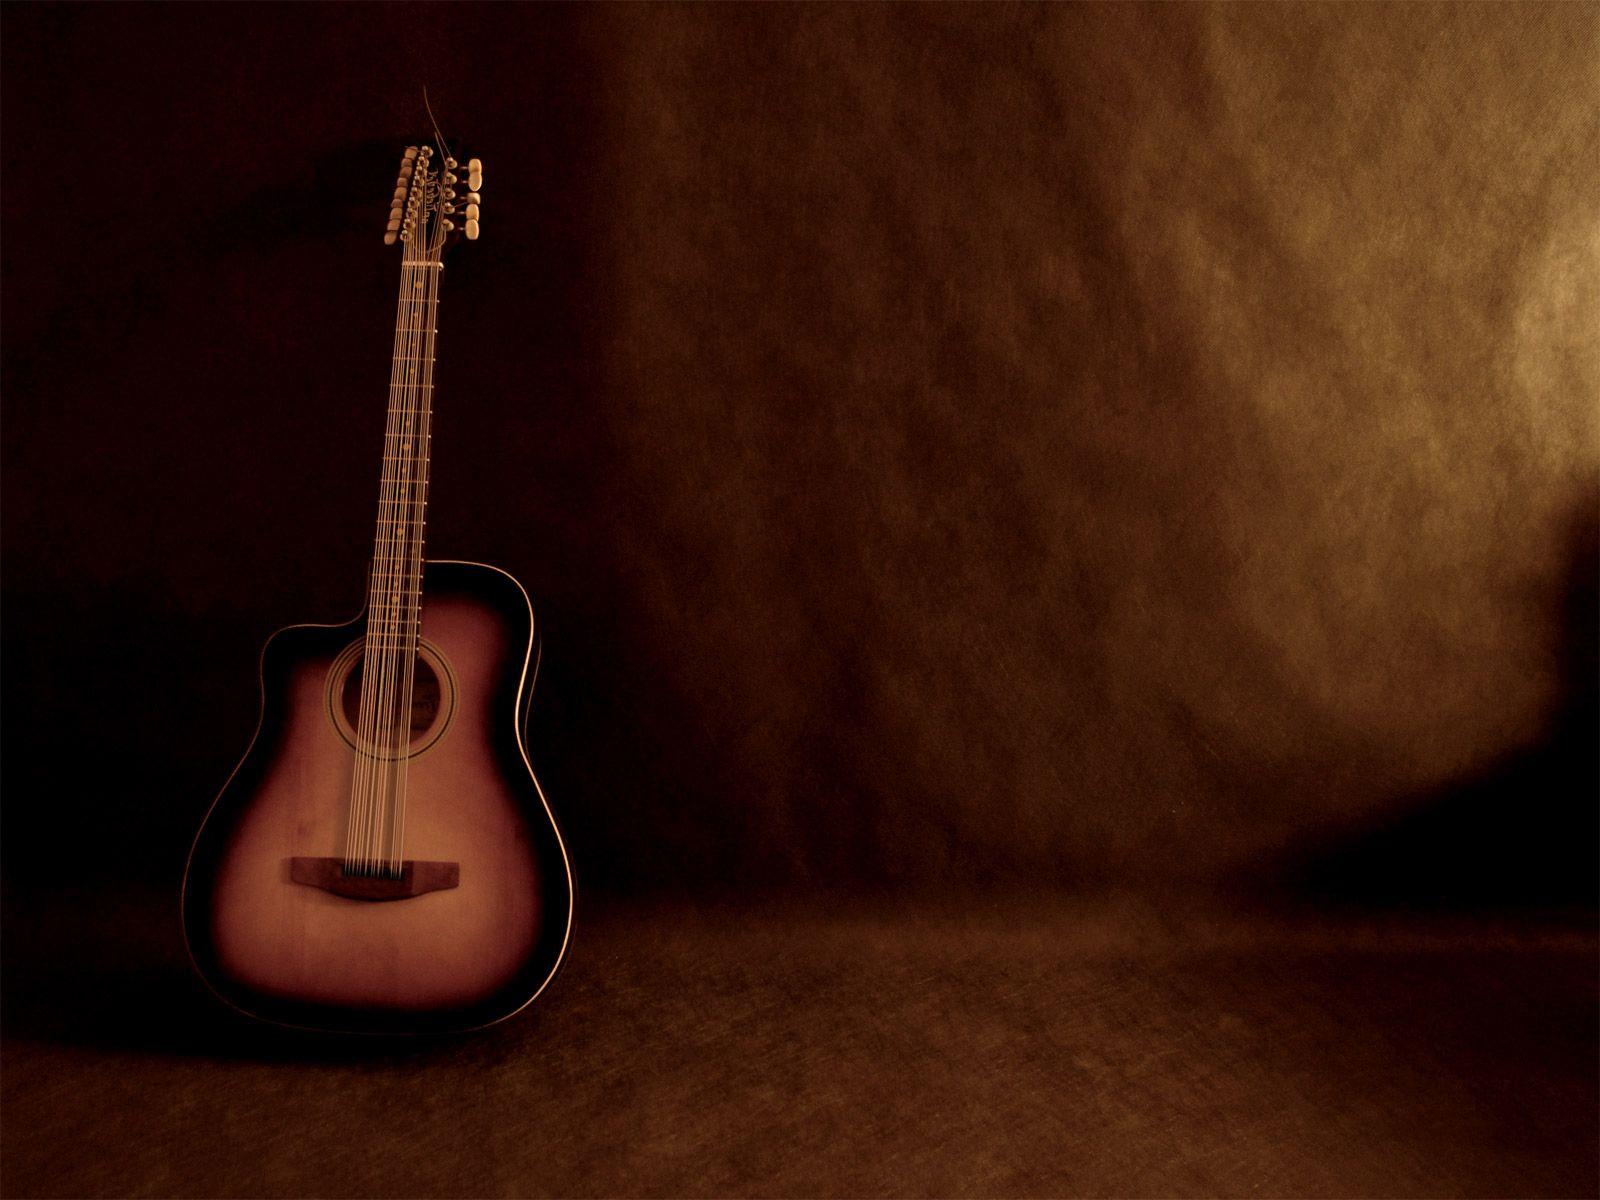 Wallpaper.wiki Acoustic Guitar Background 1600x1200 Free PIC